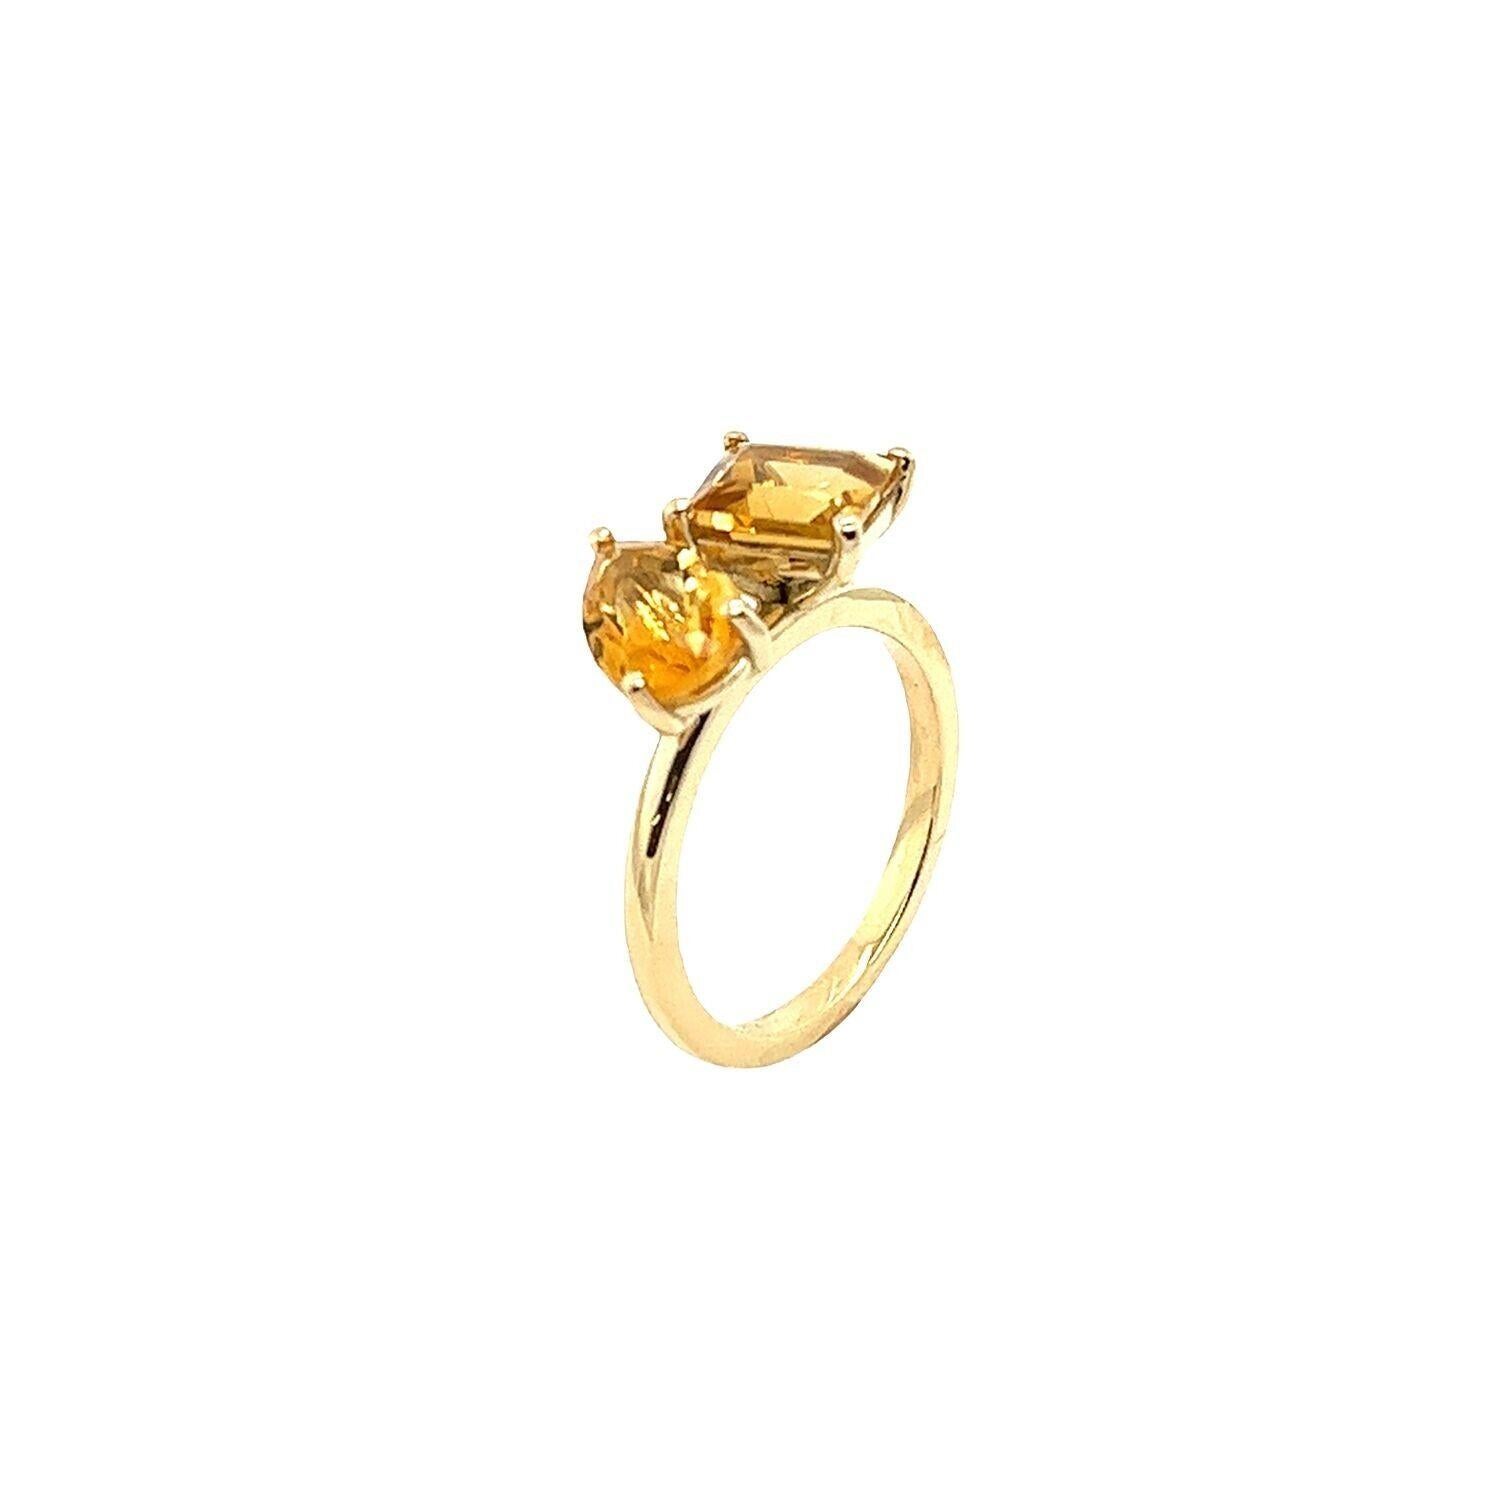 Pear Cut The Toi et Moi Golden Citrine 2.74ct Ring in 14ct Yellow Gold For Sale